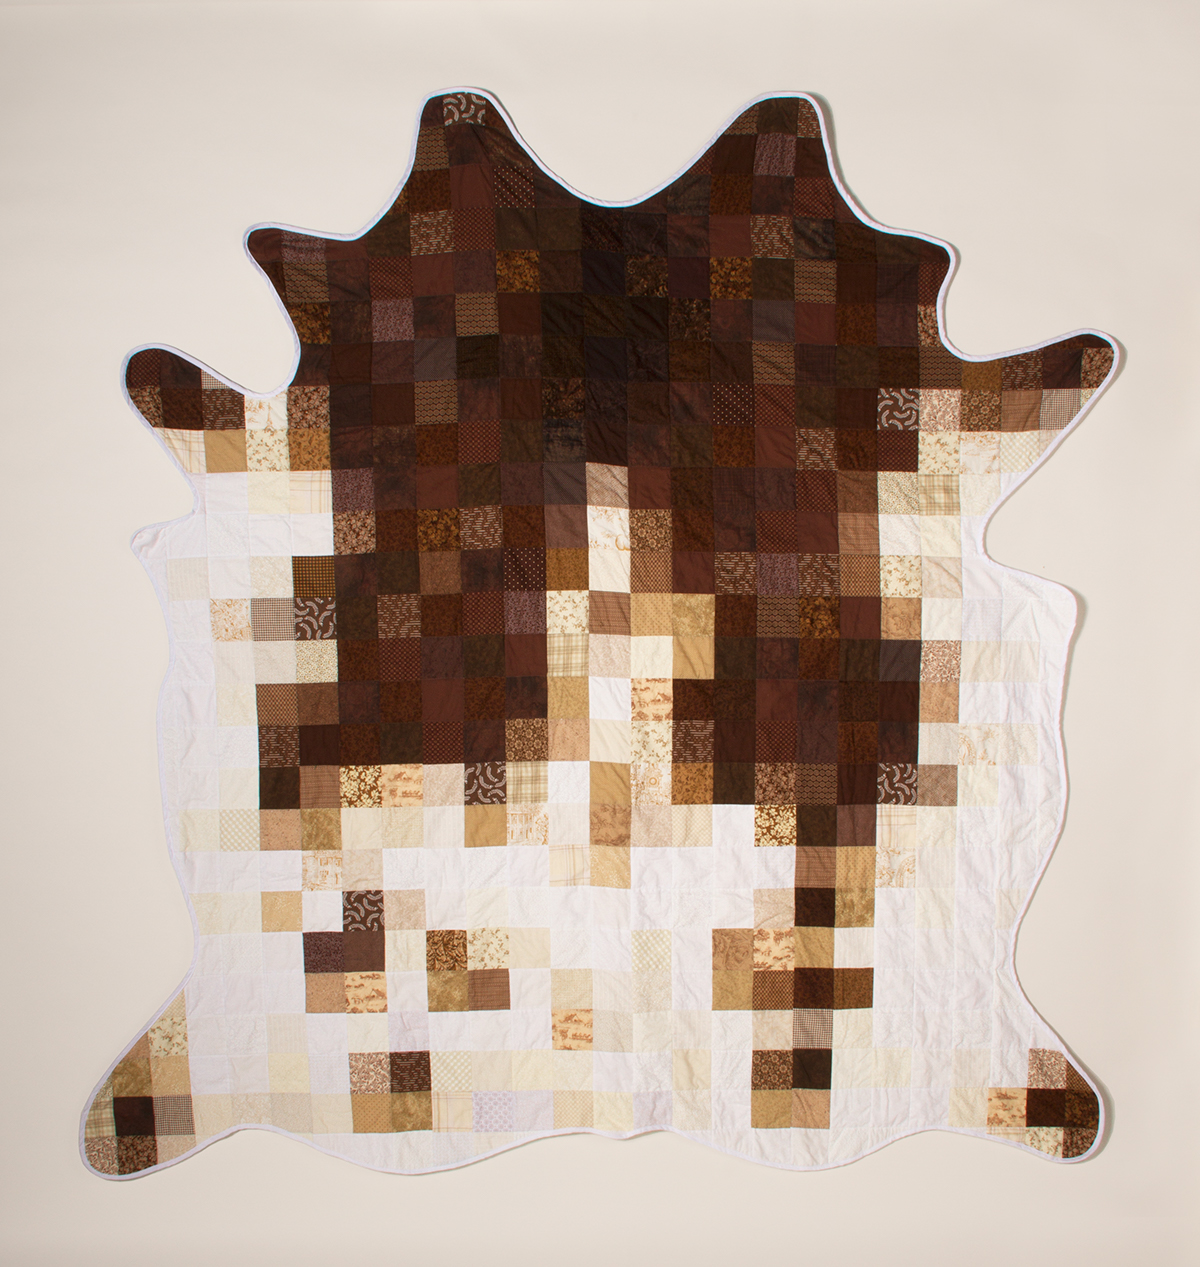 art animal quilt quilting sewing pixel brown White cow cowhide hide Cattle hereford Texas Longhorn calf